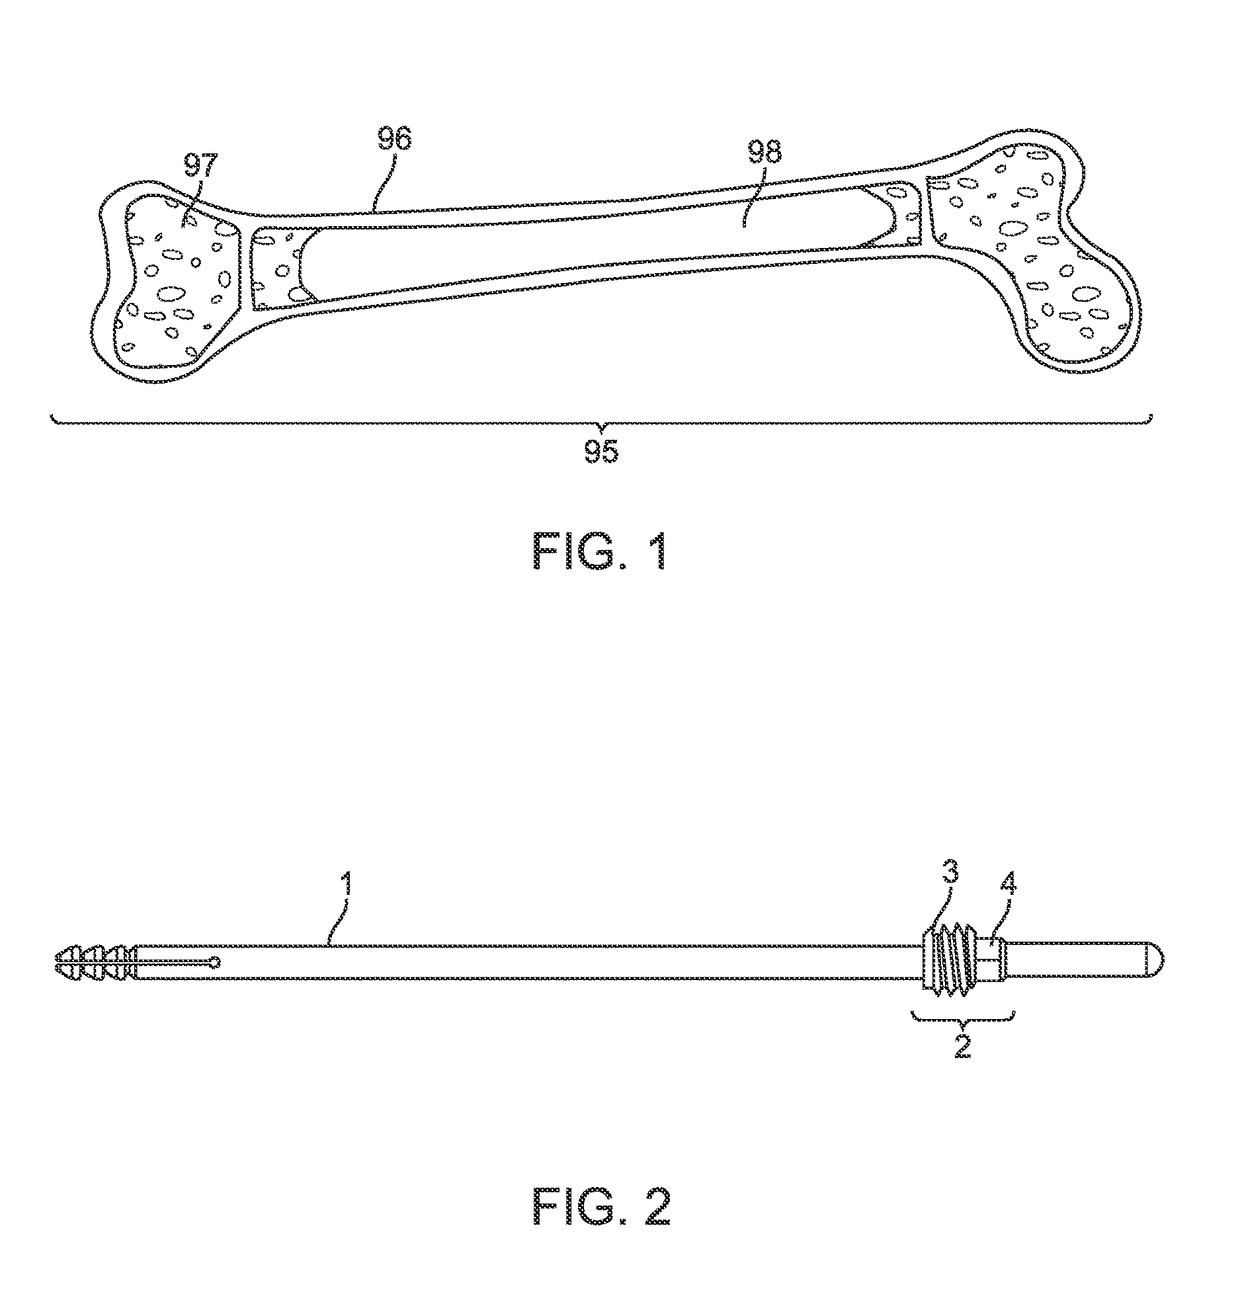 Implant and method for long bone fixation